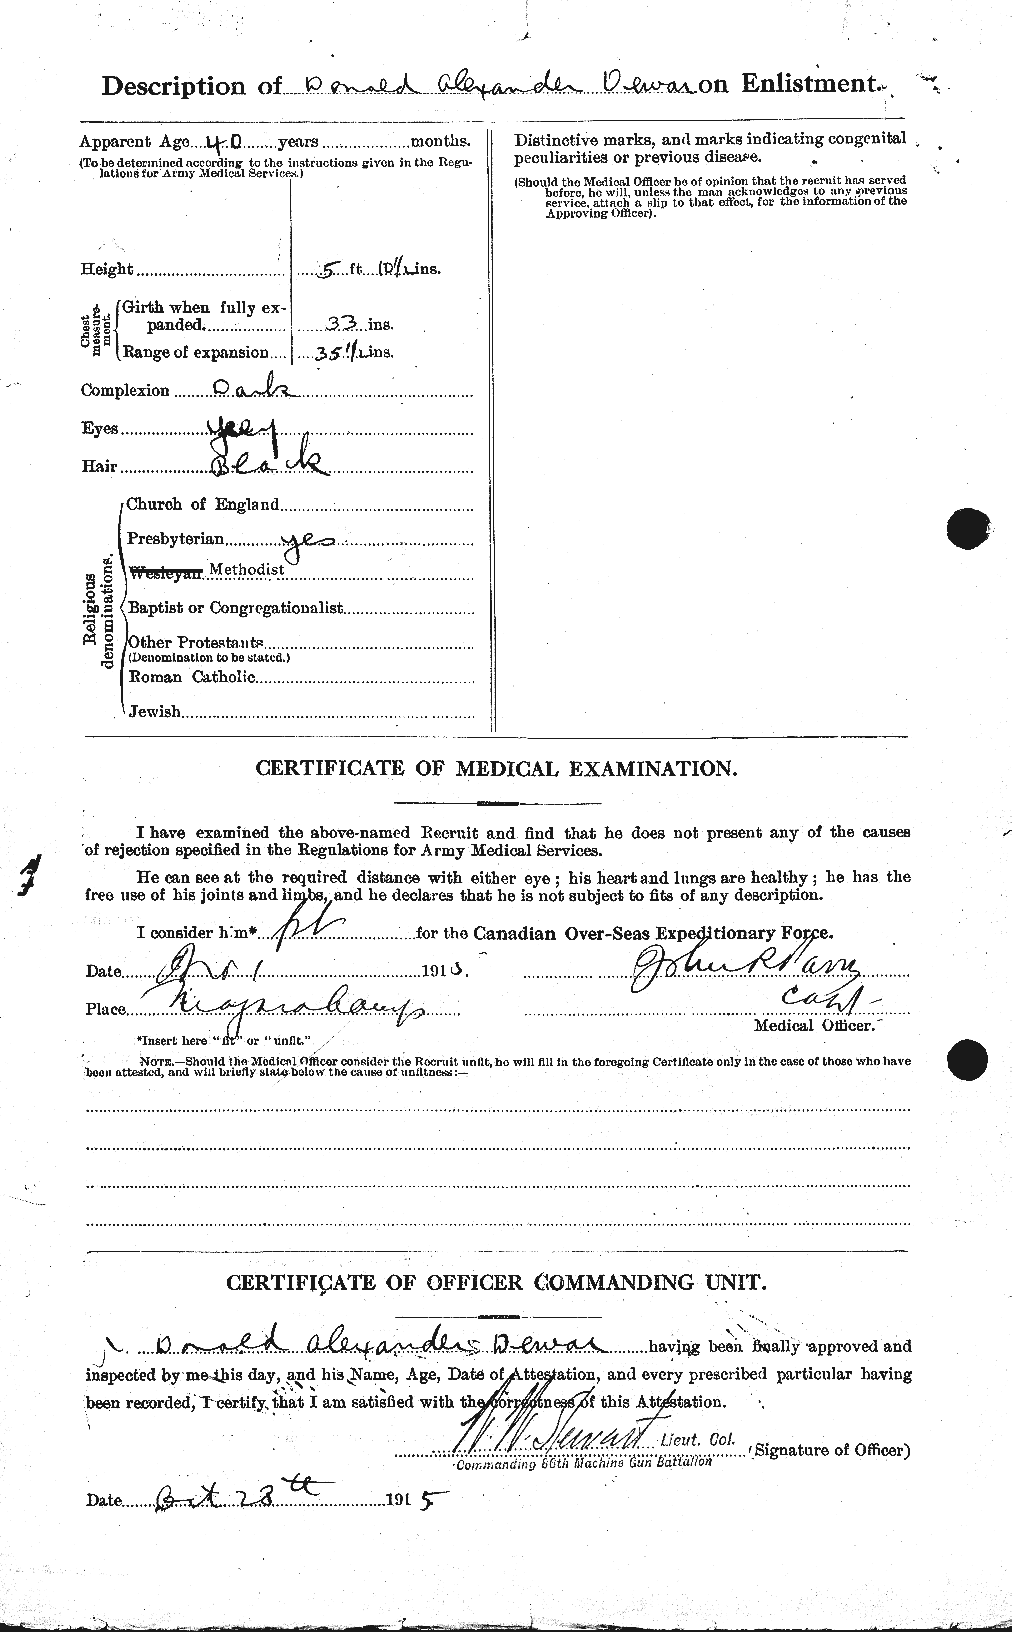 Personnel Records of the First World War - CEF 288591b